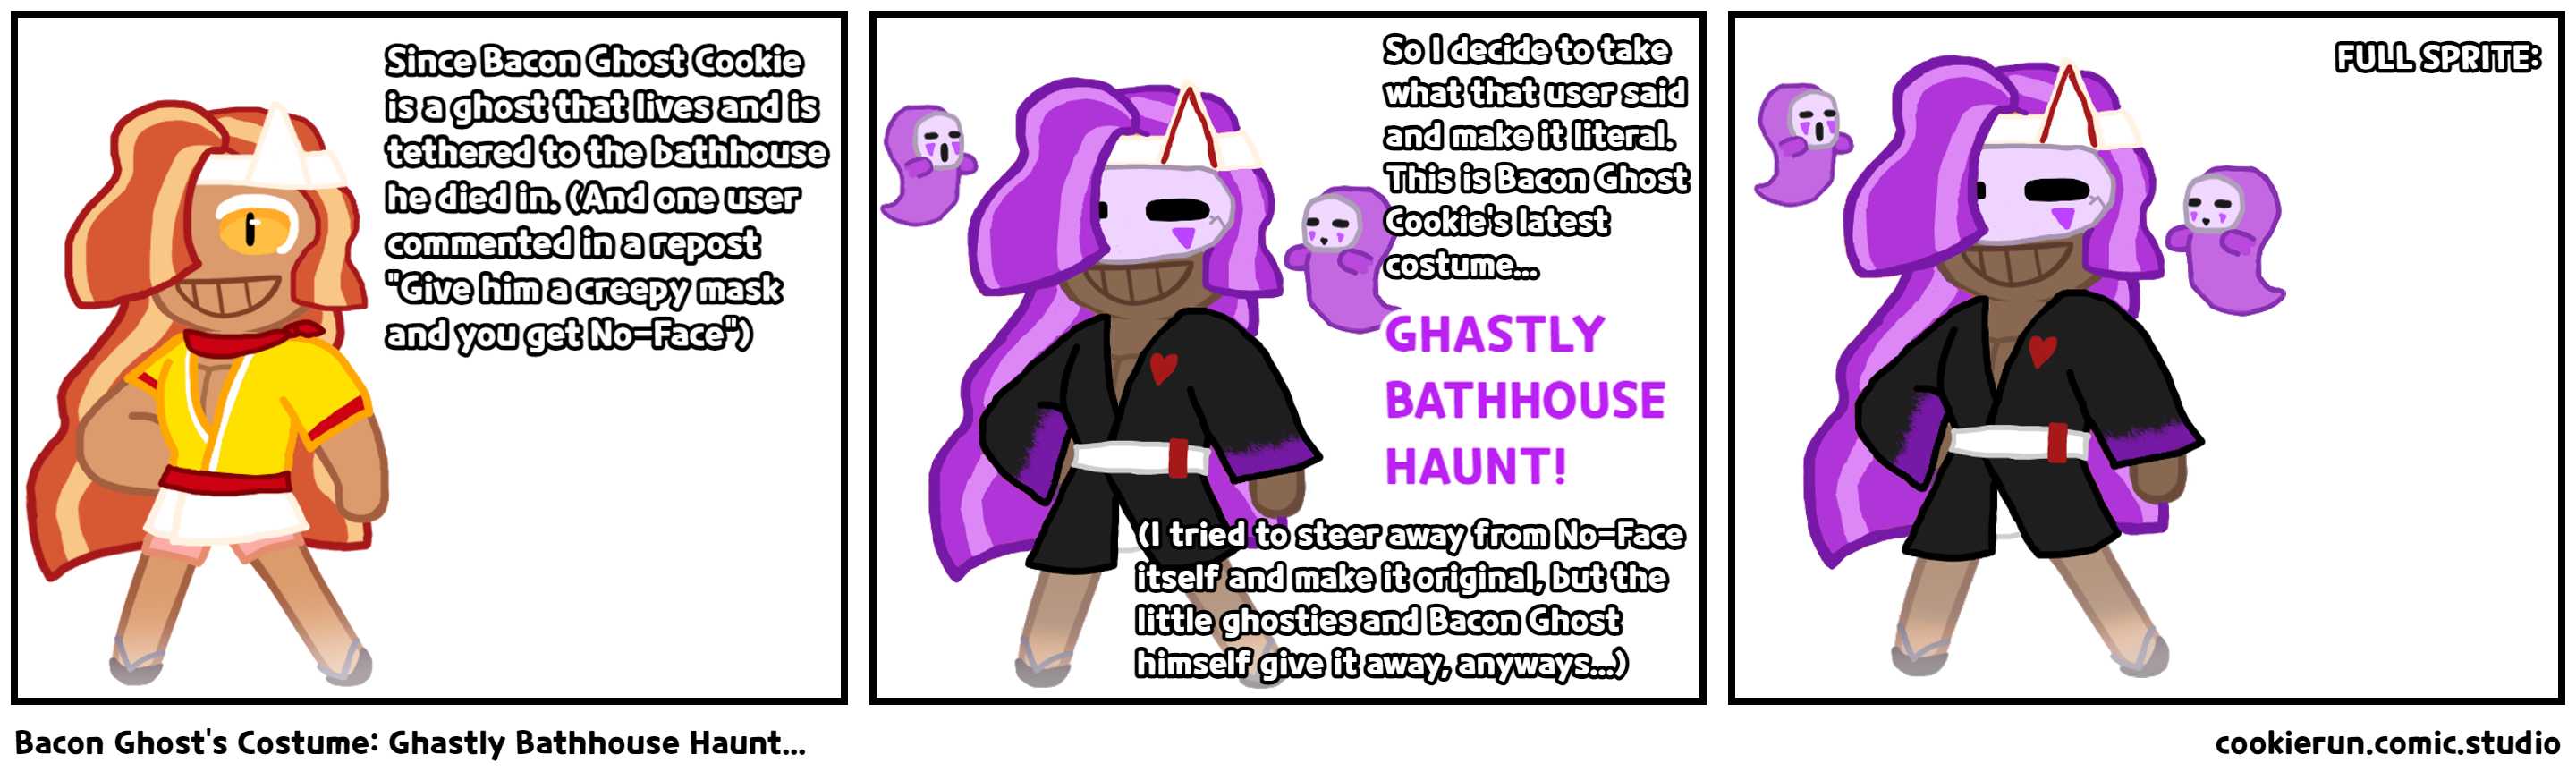 Bacon Ghost's Costume: Ghastly Bathhouse Haunt...